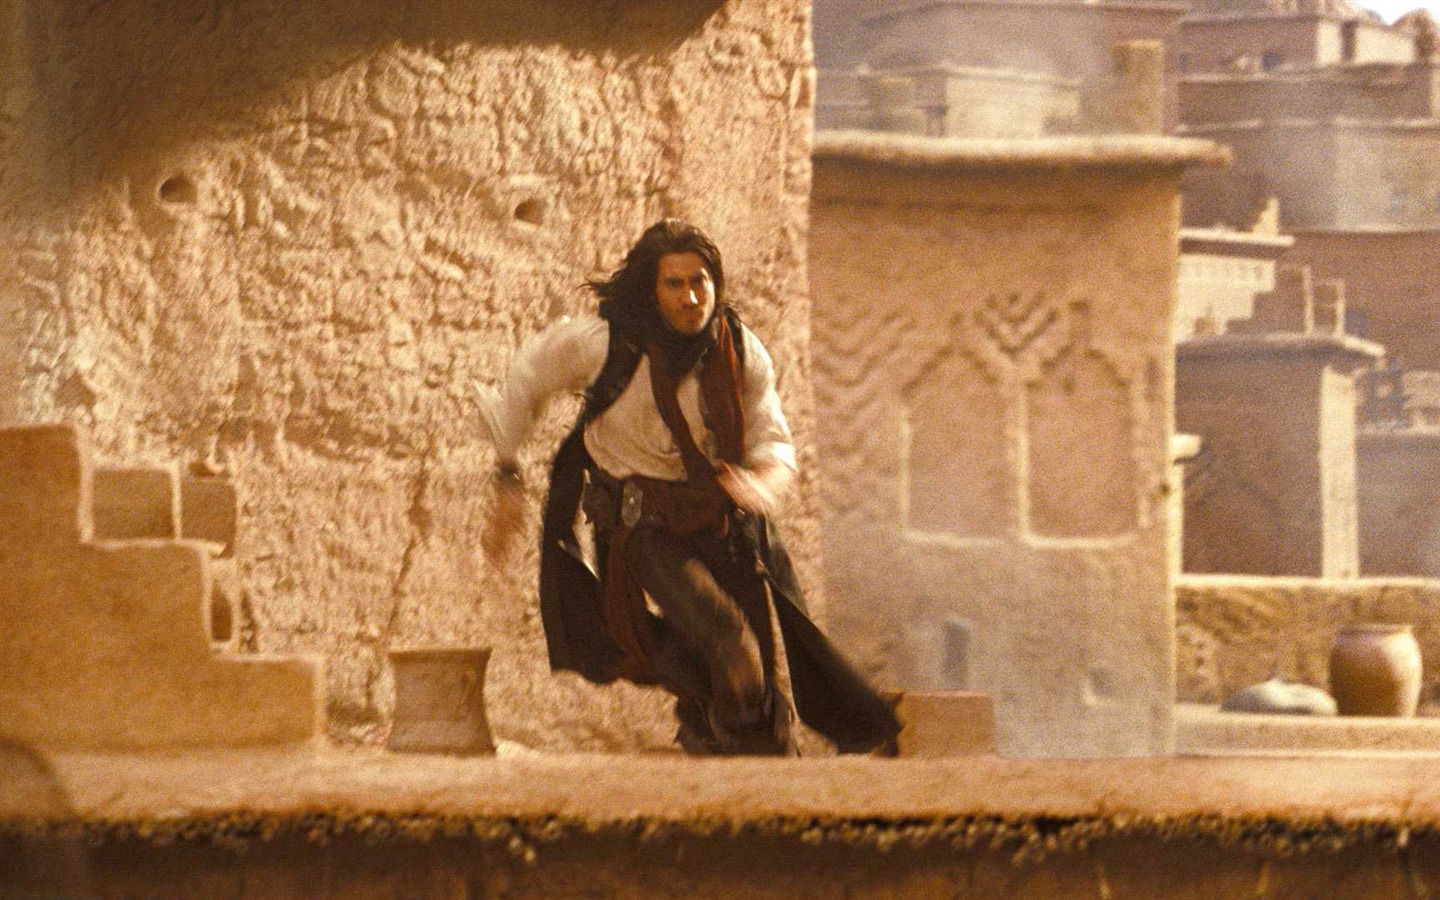 Prince of Persia The Sands of Time 波斯王子：時之刃 #34 - 1440x900